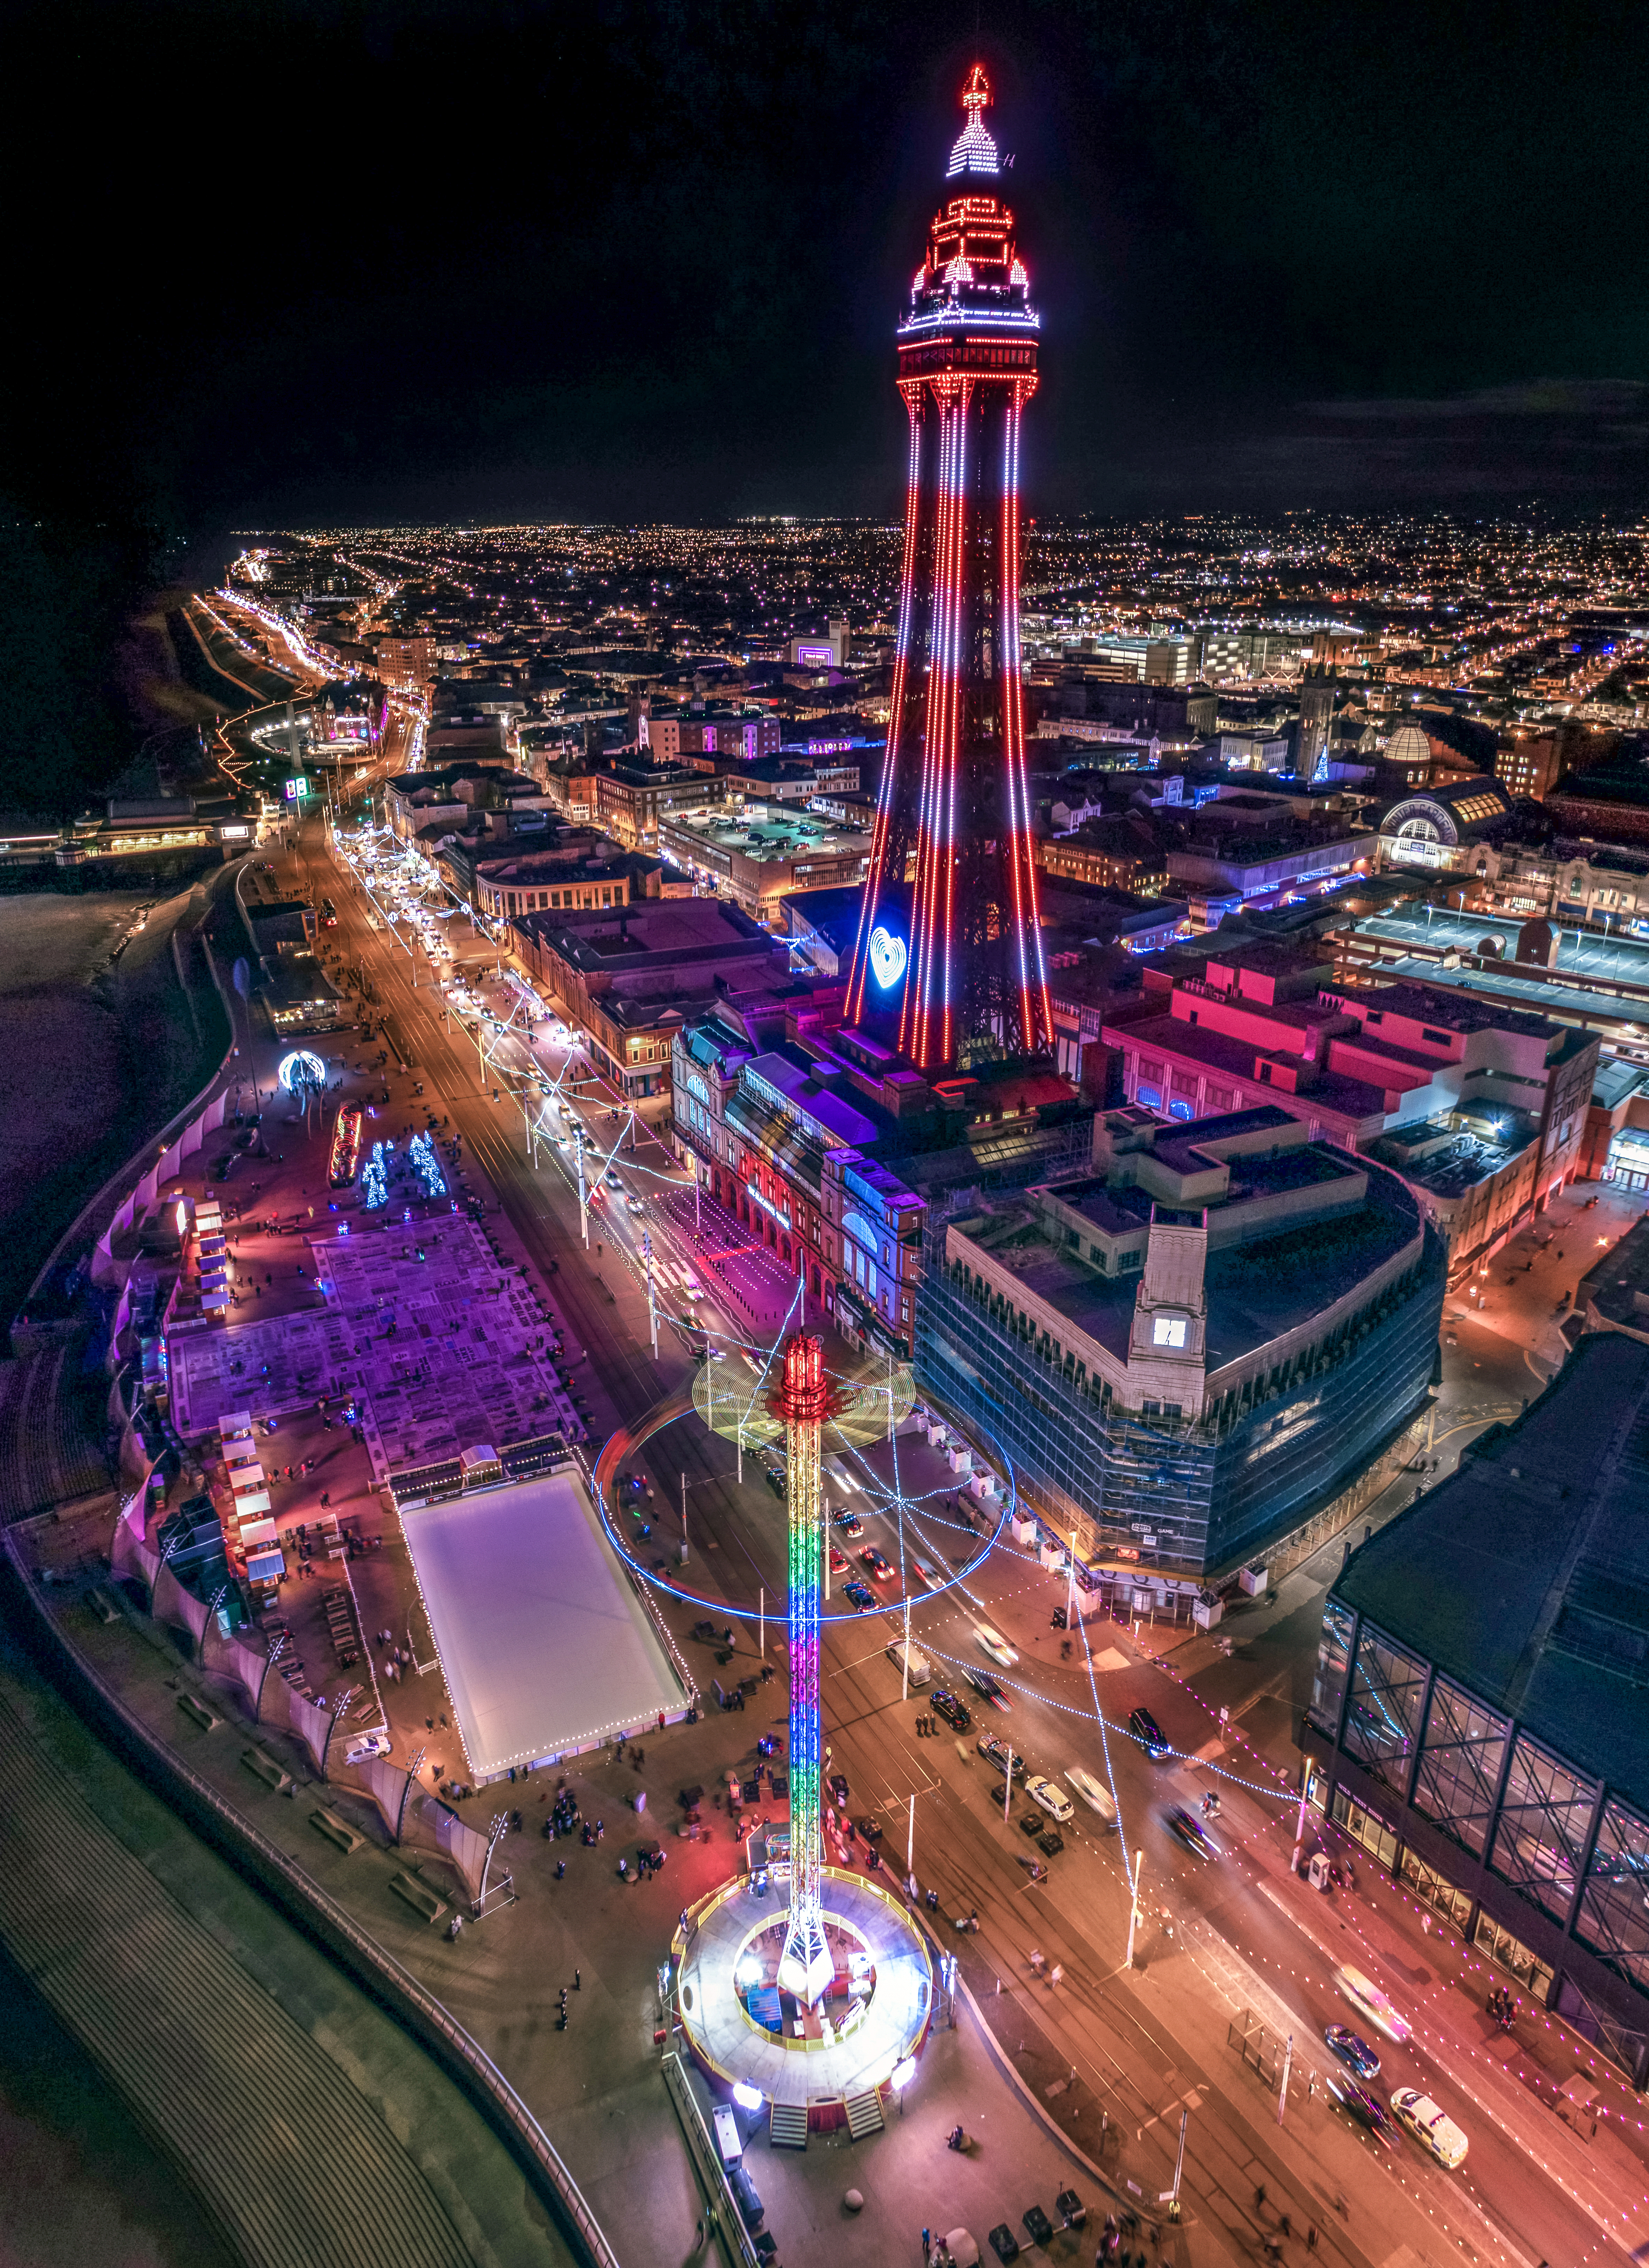 Christmas by the Sea will be found on the festival headland near Blackpool Tower and will run from November 17, 2023, until January 1, 2024